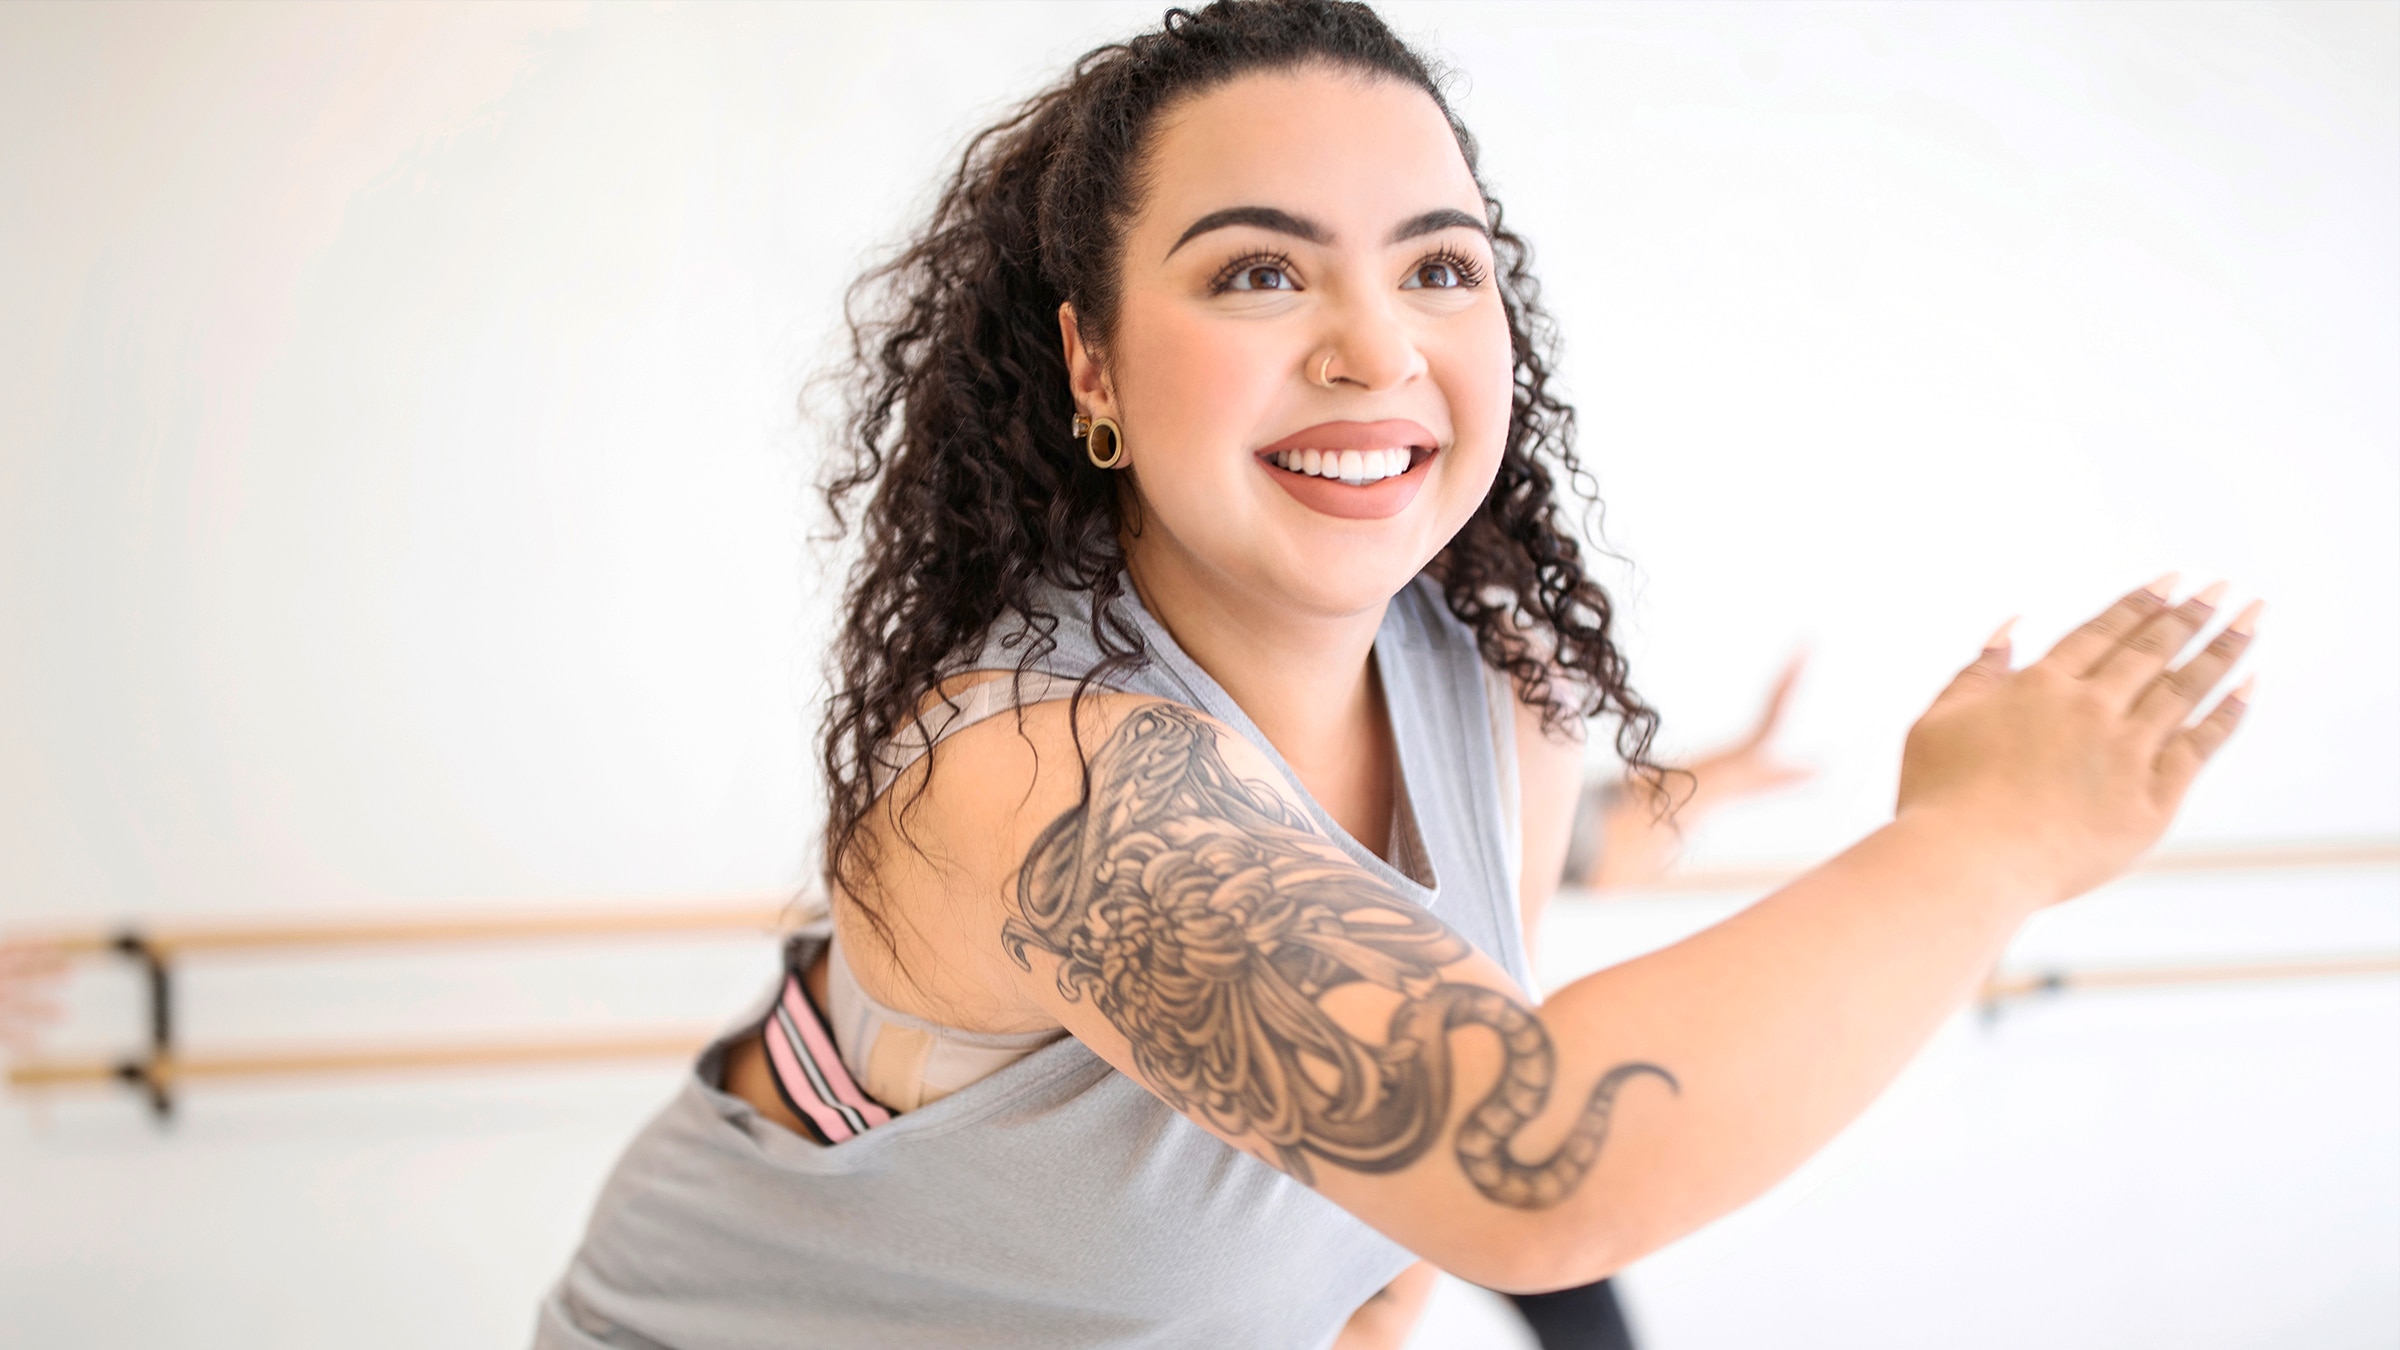 woman with tattooed arm dancing indoors